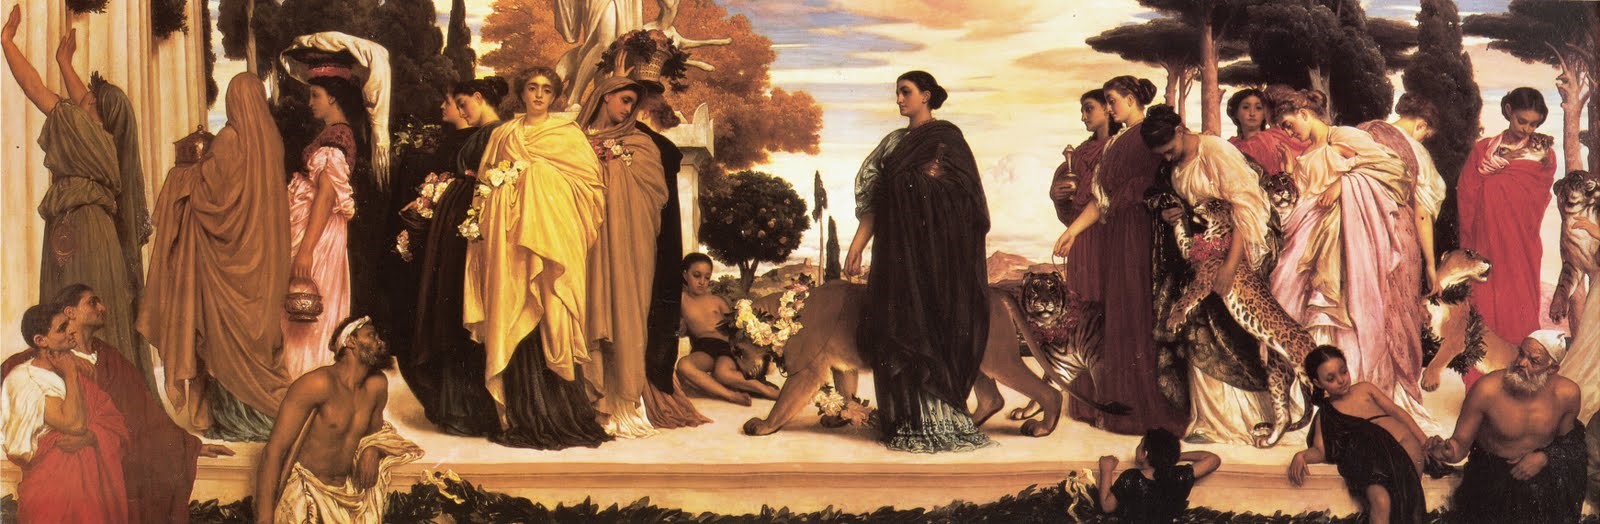 The Syracusan Bride leading Wild Animals in Procession to the Temple of Diana by Lord Frederick Leighton